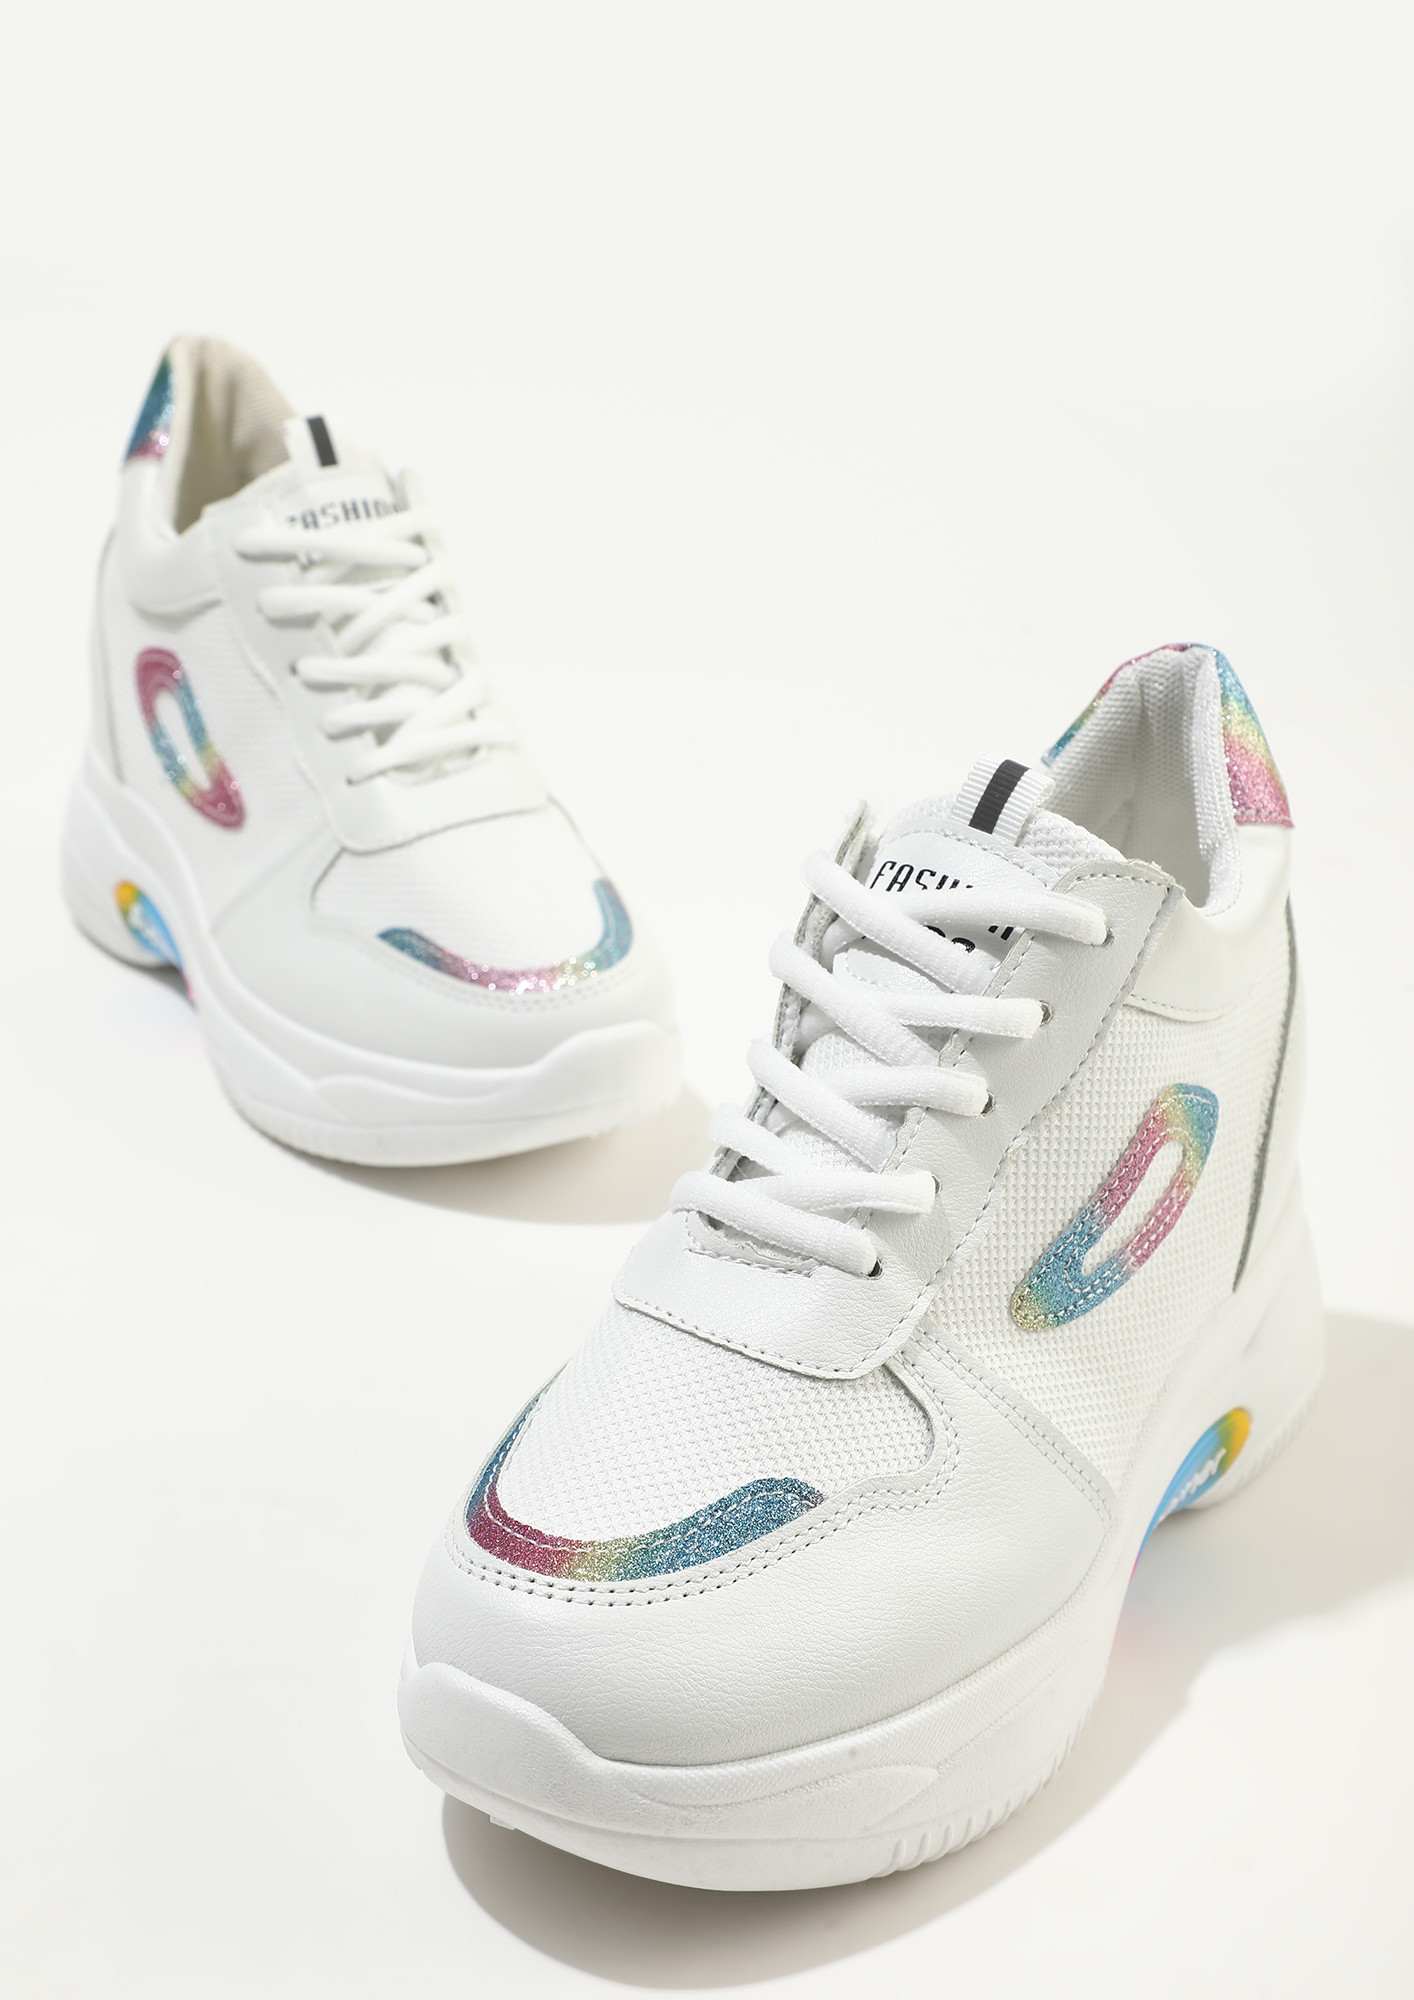 FEEL THE ENERGY MULTICOLORED TRAINERS